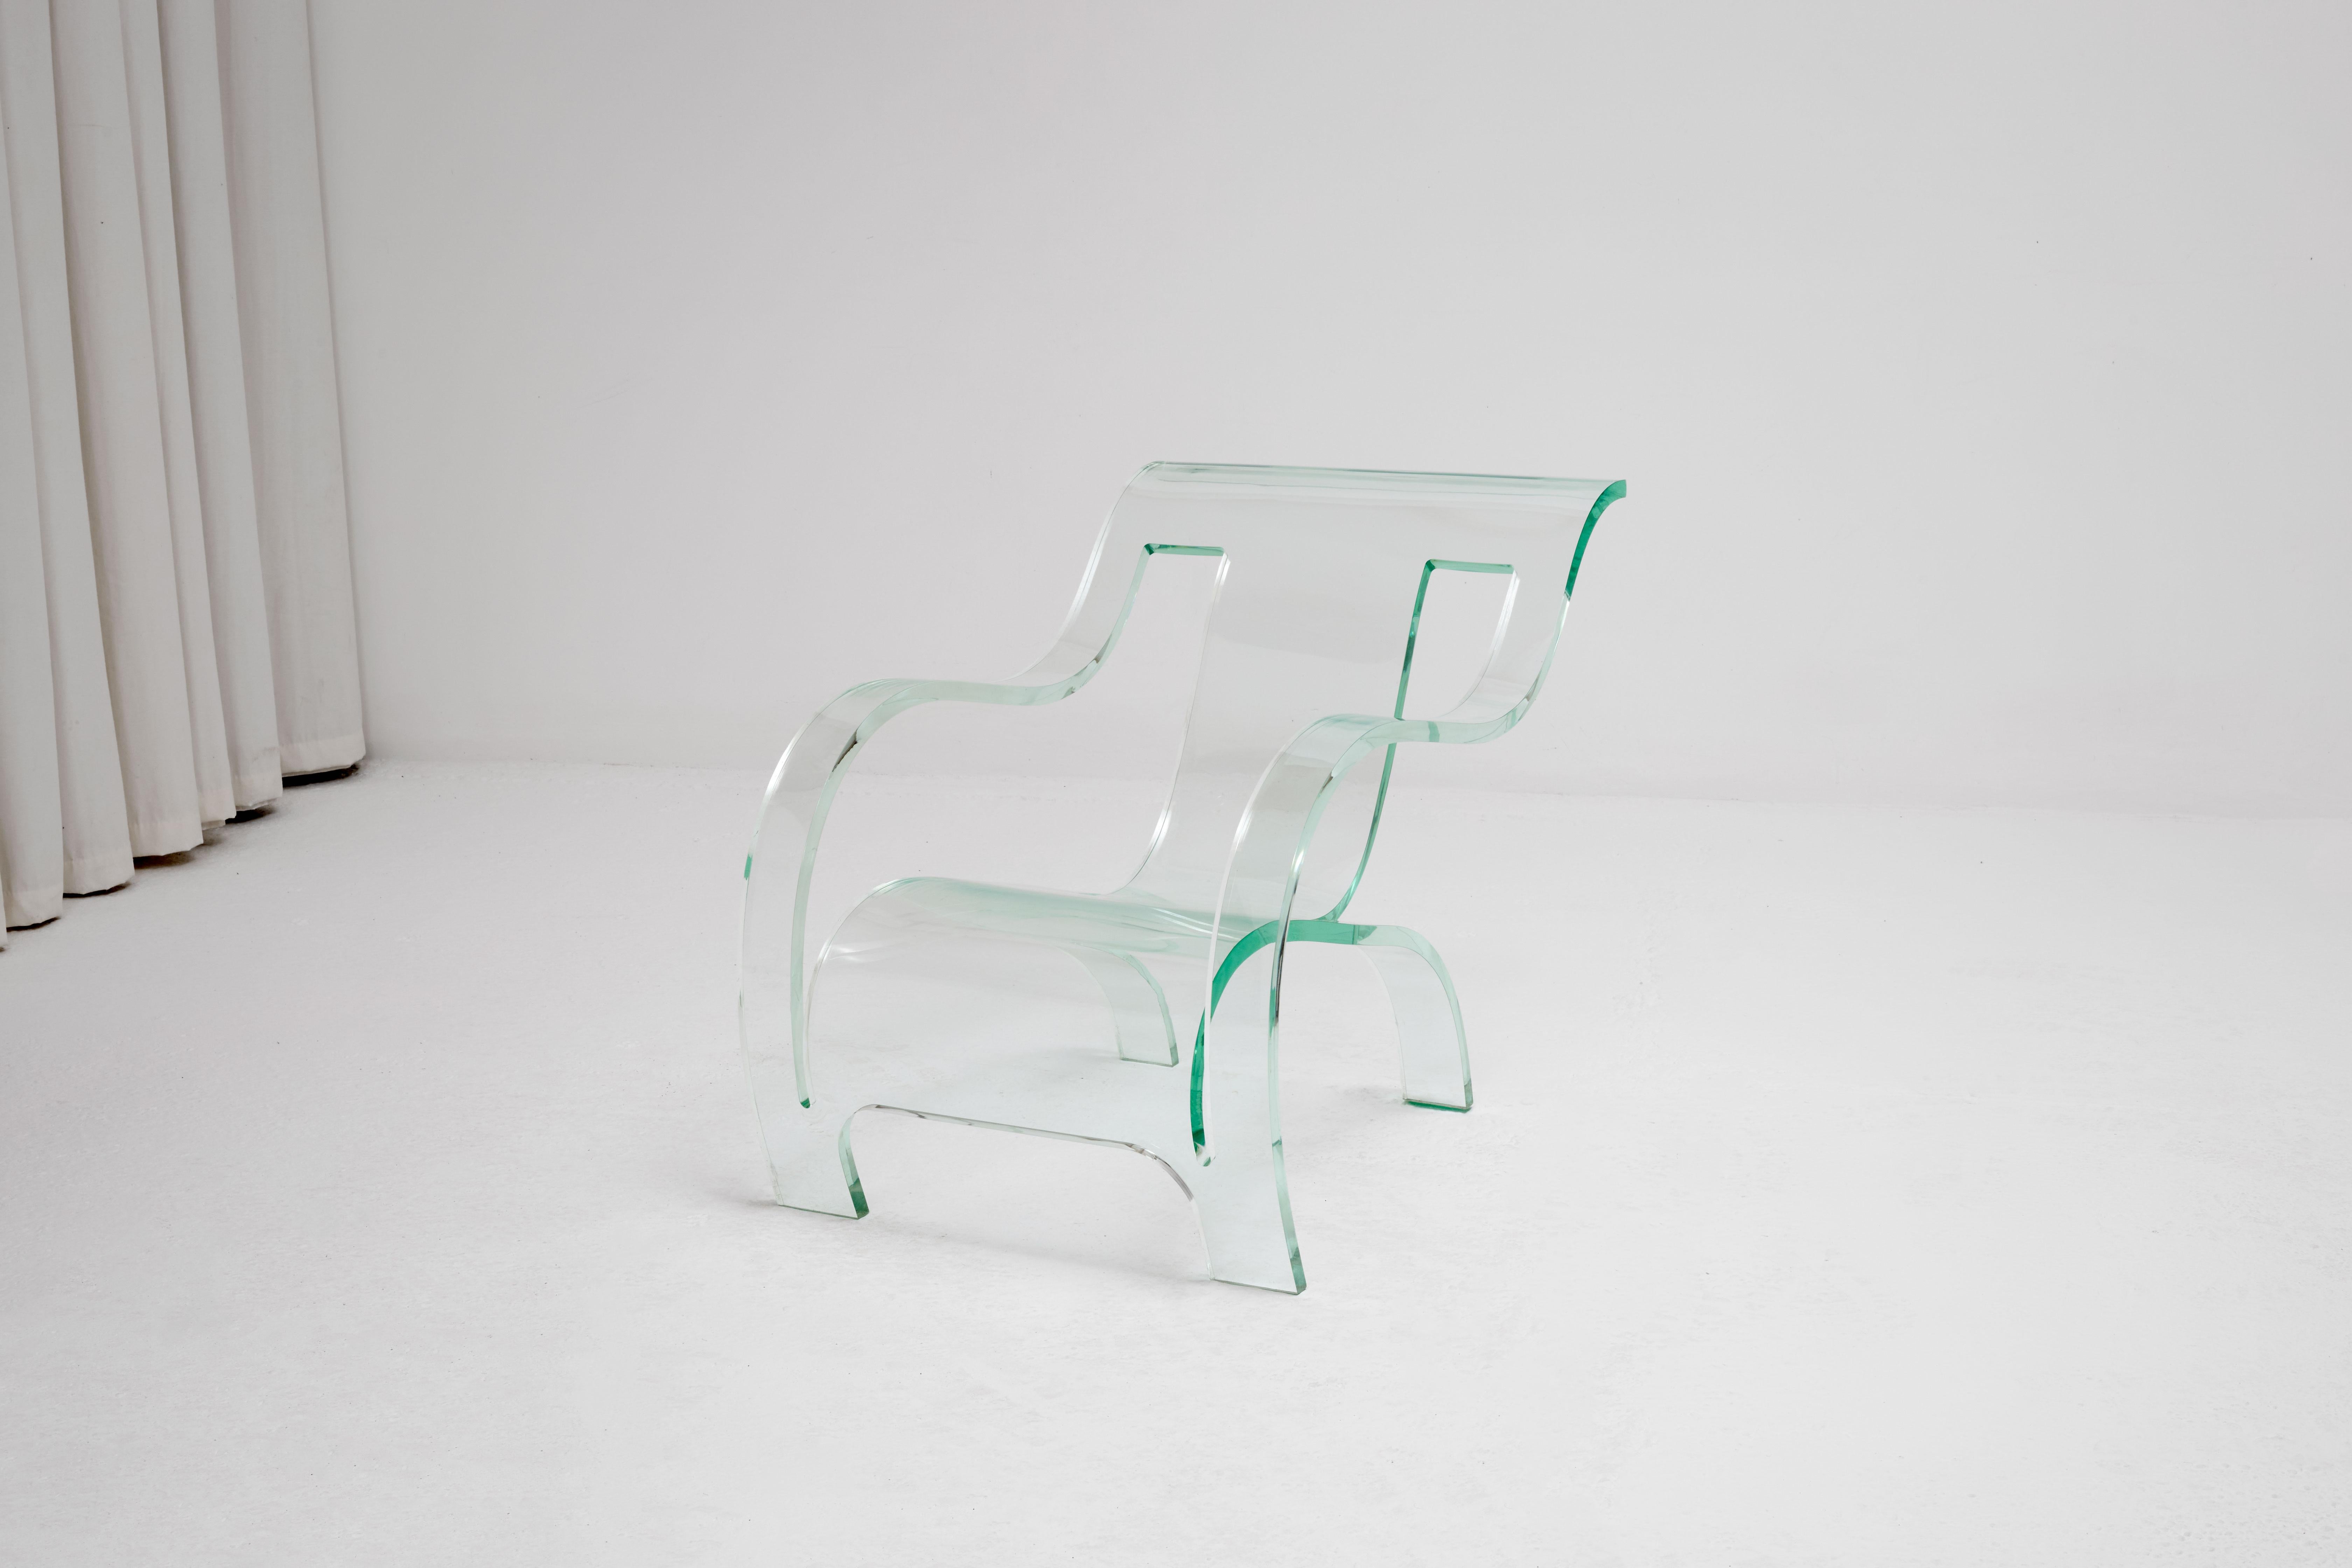 A beautiful example of Gerald Summers iconic 1934 plywood chair design, reimagined in lucite (plexiglass), circa 1970’s. The condition is good with some minor wear and scratches consistent with age.

Dimensions: H70cm W60cm D91cm SH33cm

